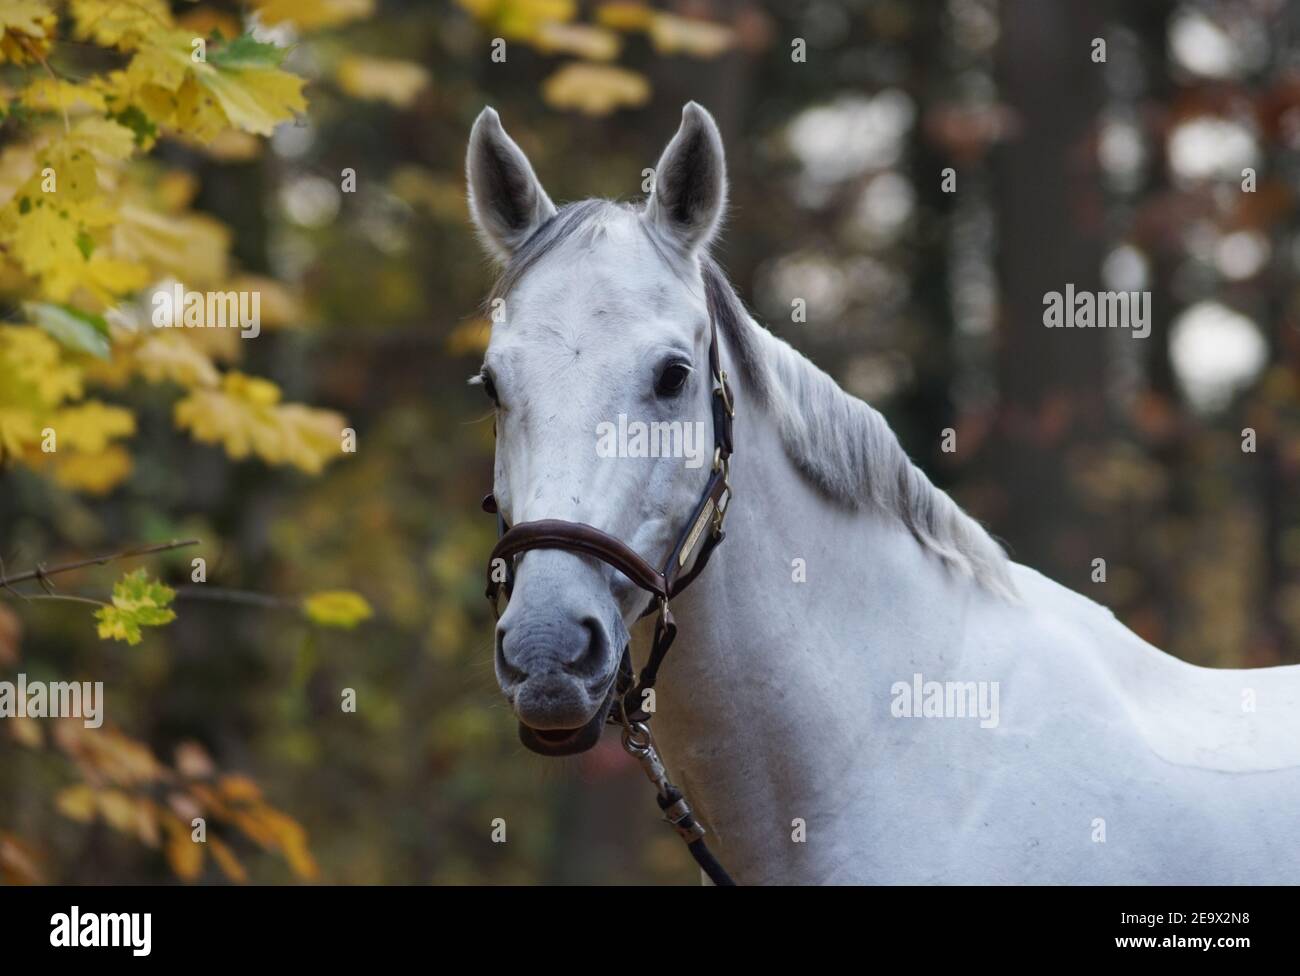 white horse portrait in autumn forest Stock Photo